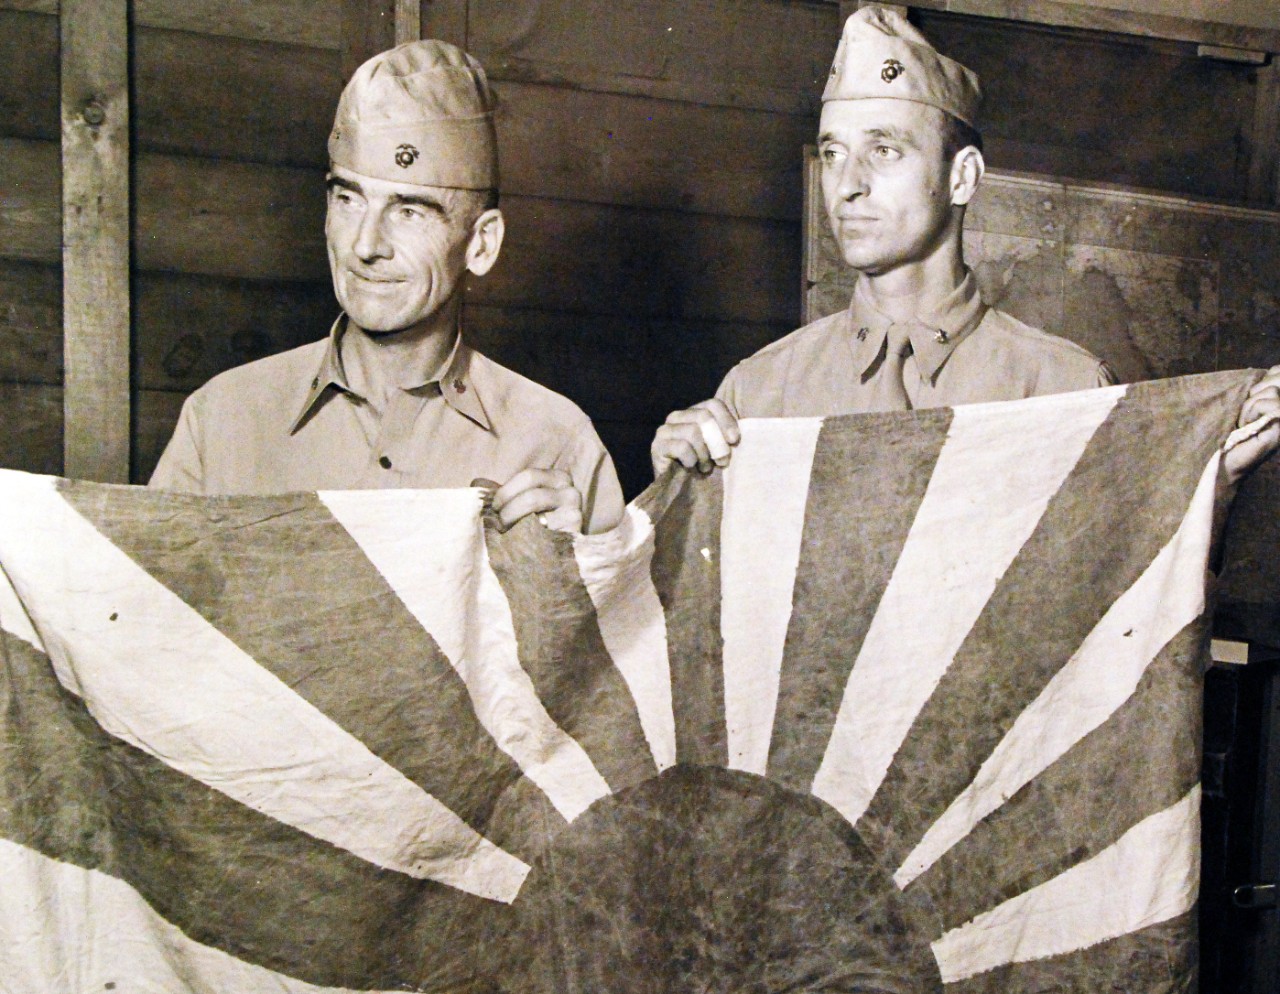 80-G-40182:  Makin Island Raid, August 17-18, 1942.  Lieutenant Colonel Evans F. Carlson, USMCR, and Major James Roosevelt hold a Japanese flag taken from the Japanese Headquarters after the raid on Makin Island.  Note, Carlson is known for his Marine Raiders, and James Roosevelt was the oldest son of President Franklin D. Roosevelt.   Official U.S. Navy Photograph, now in the collections of the National Archives.   (2015/10/20).